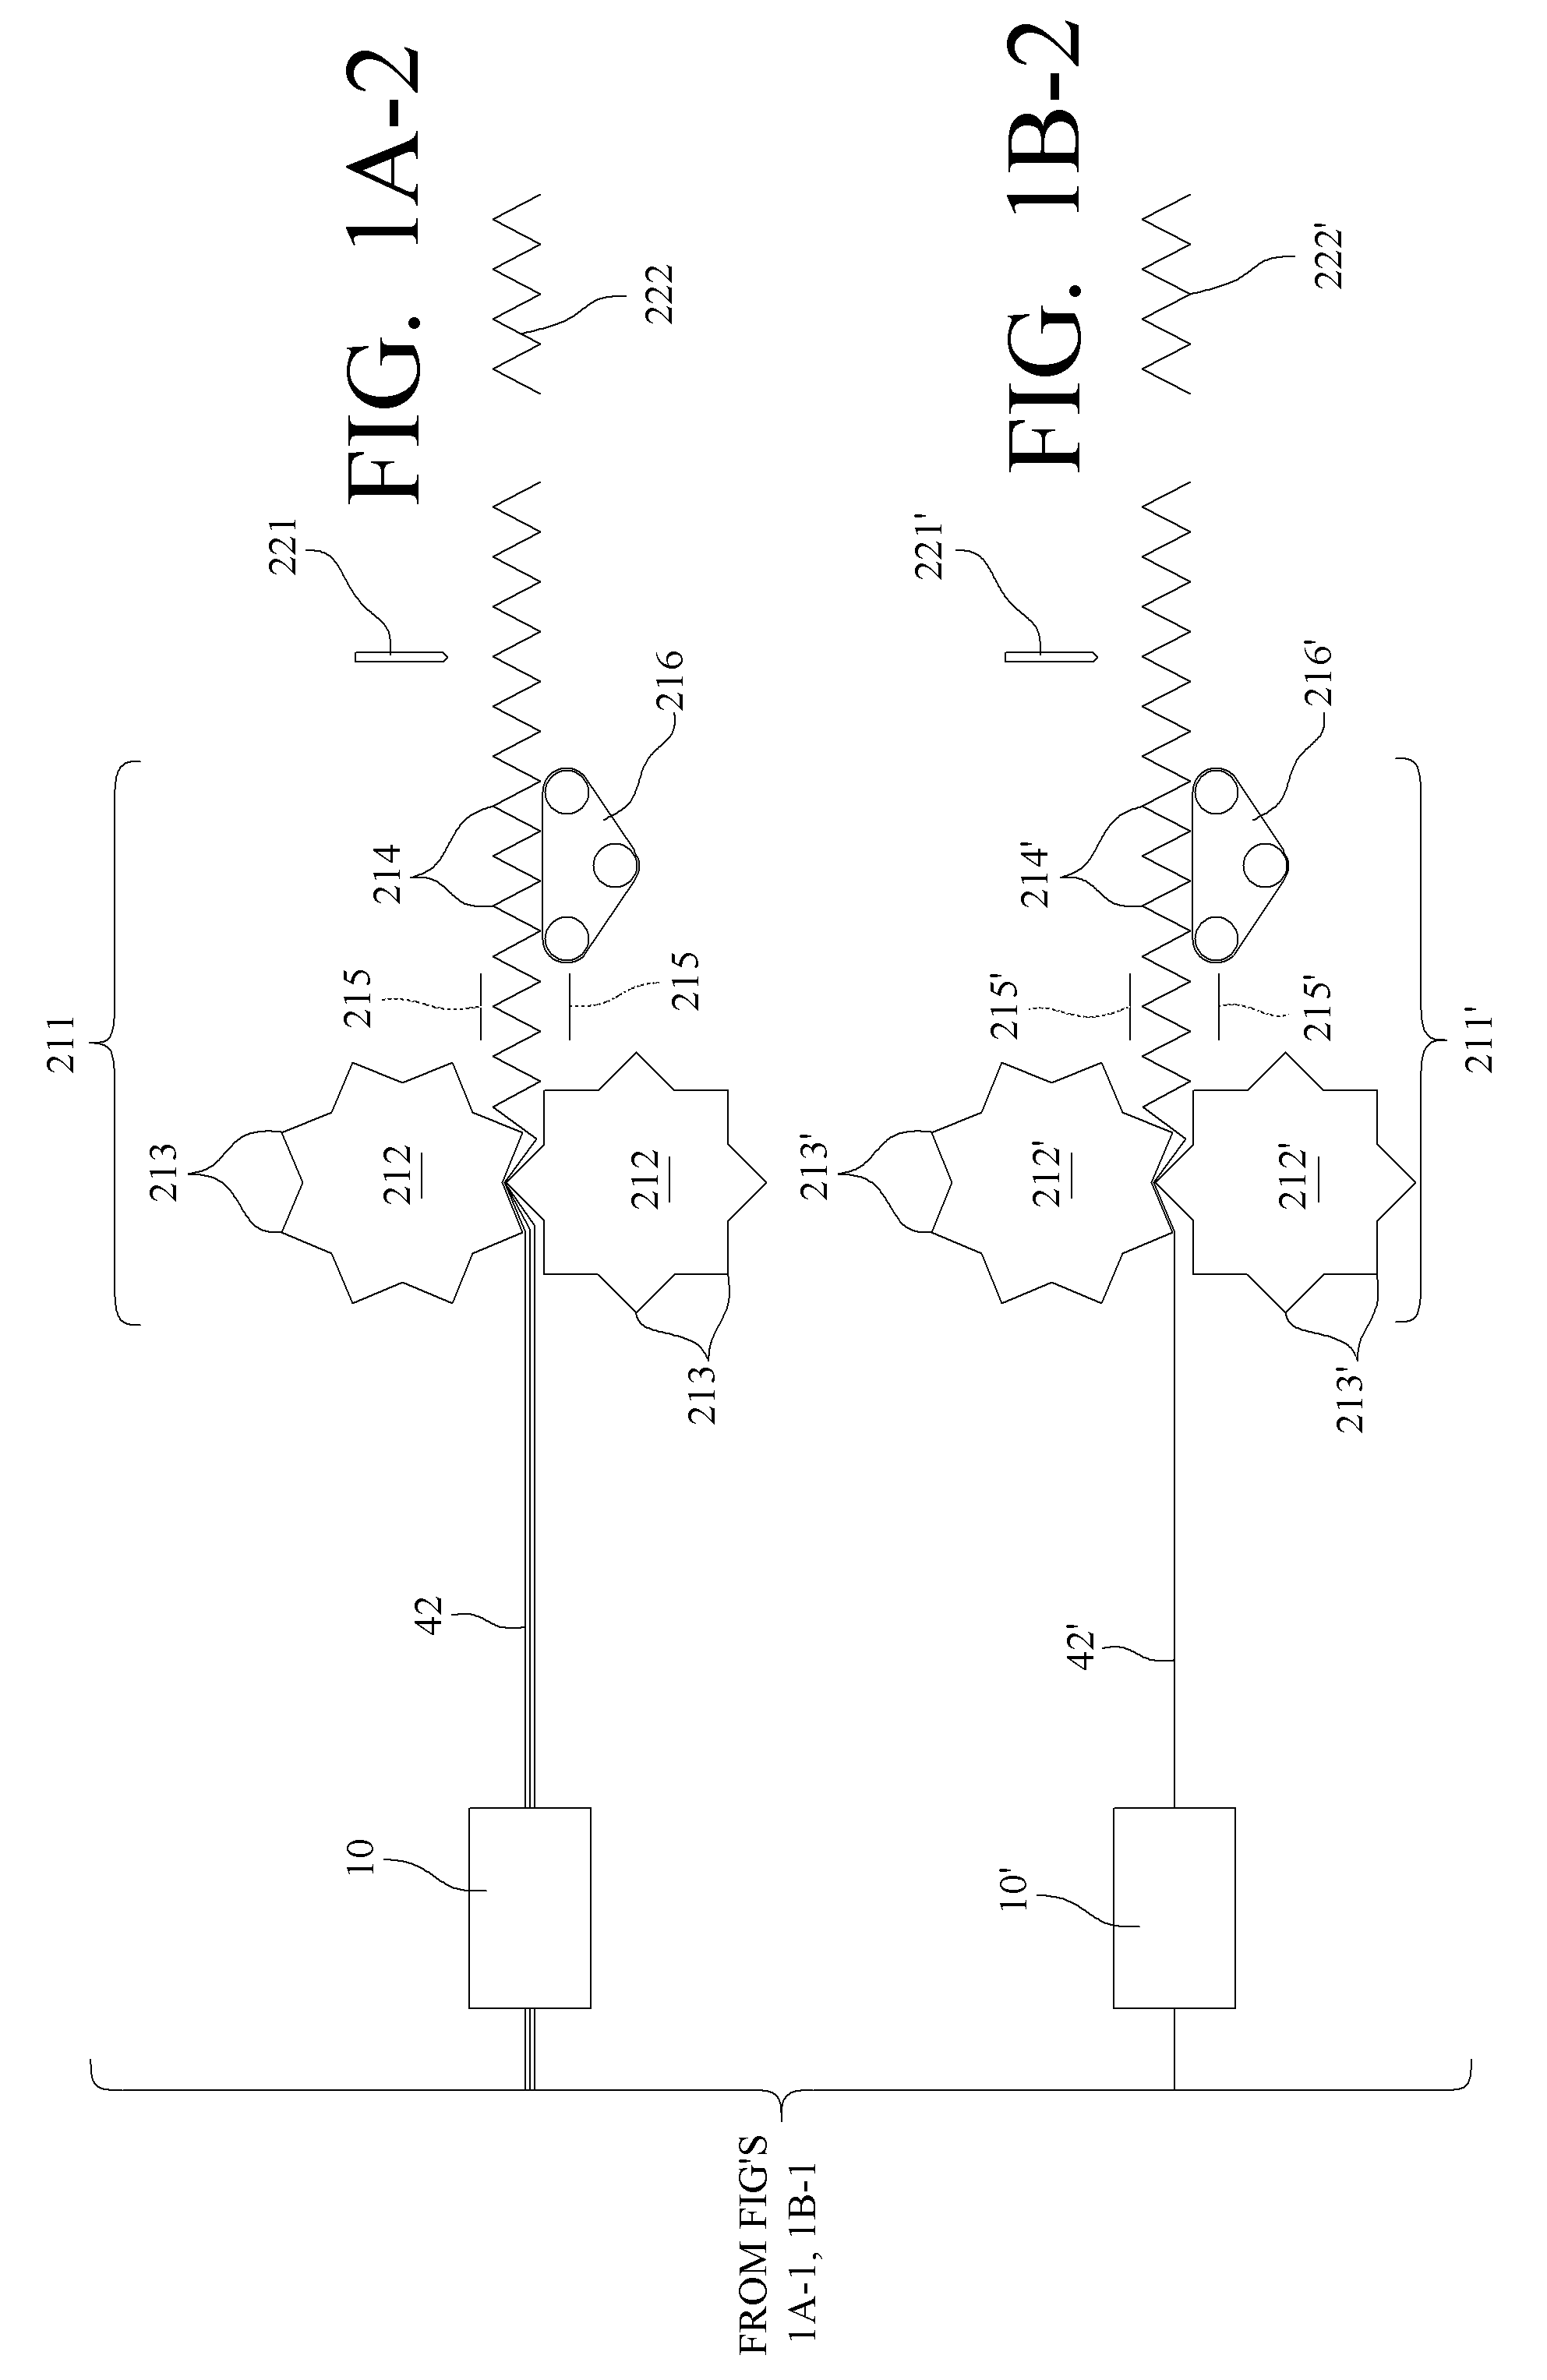 Product and method of forming a gradient density fibrous filter